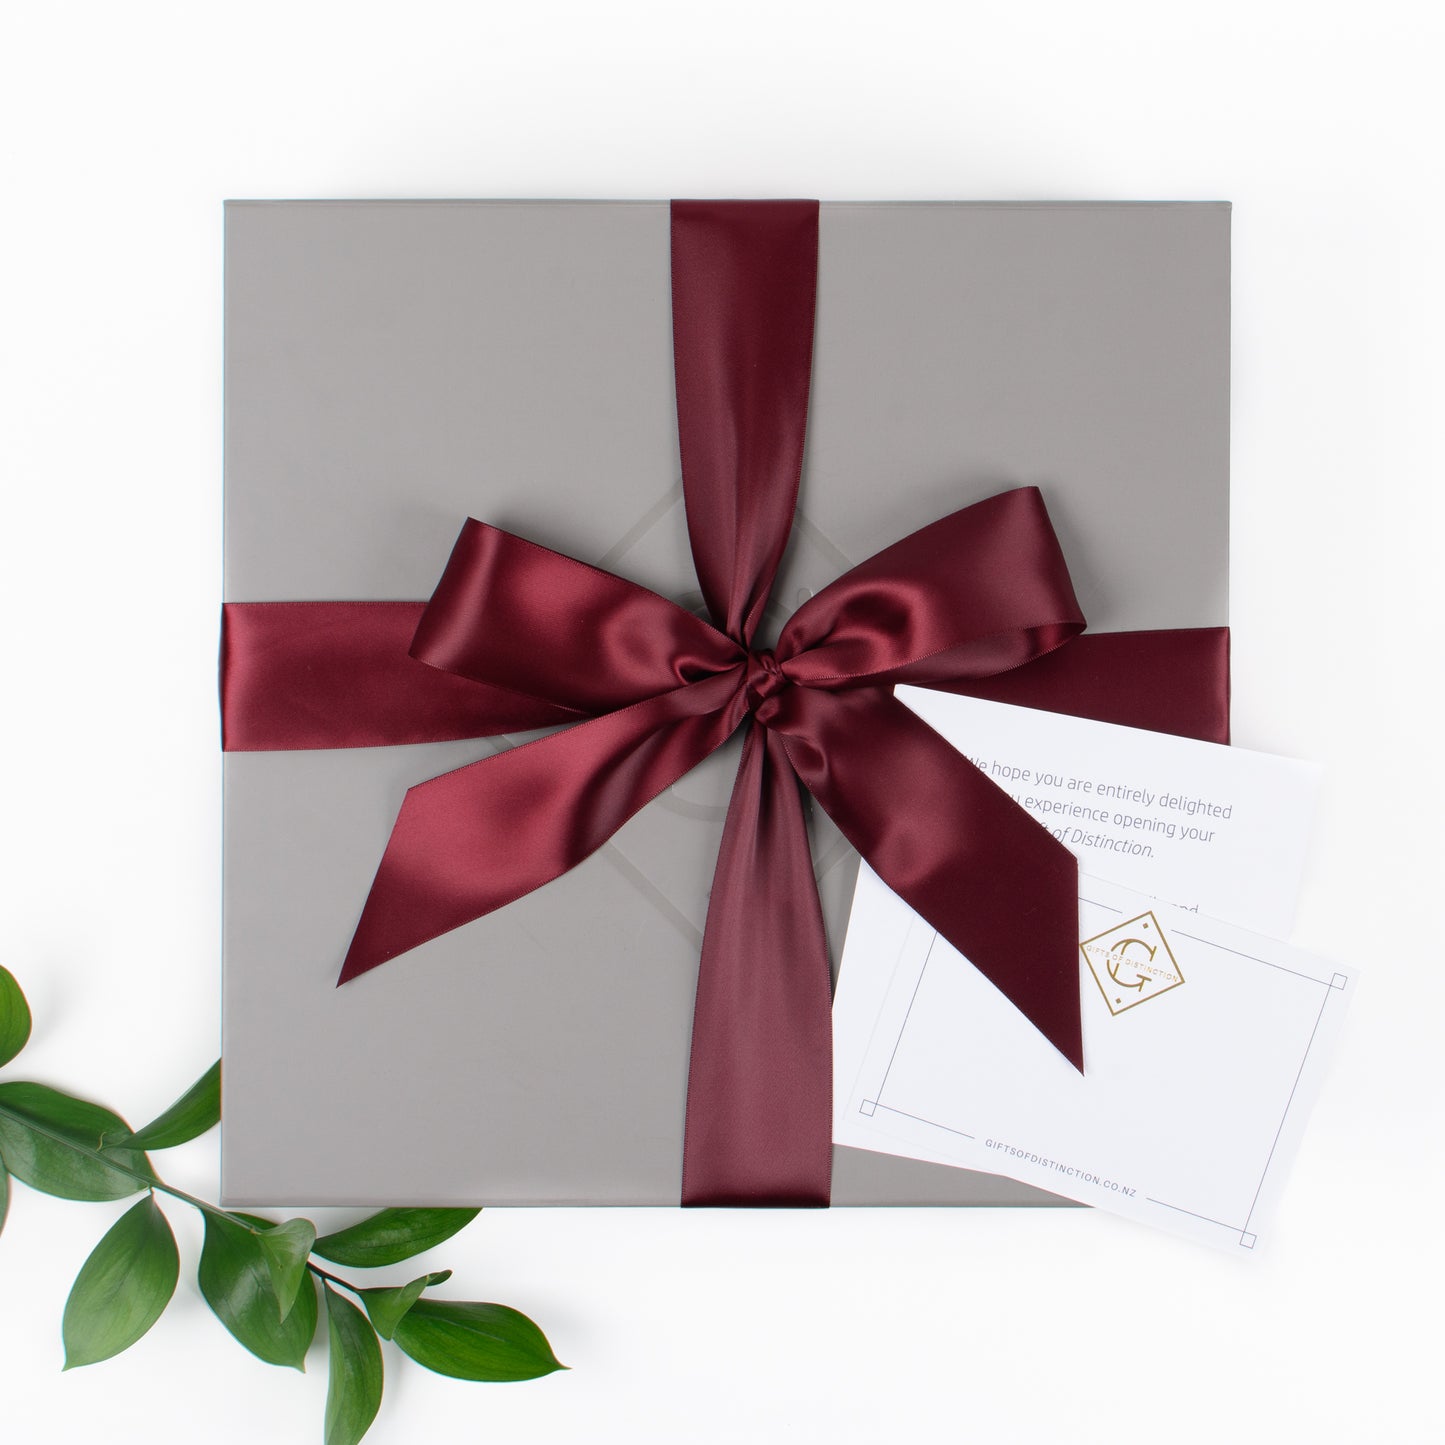 Master Jack - Gift Boxes NZ - Gifts of Distinction